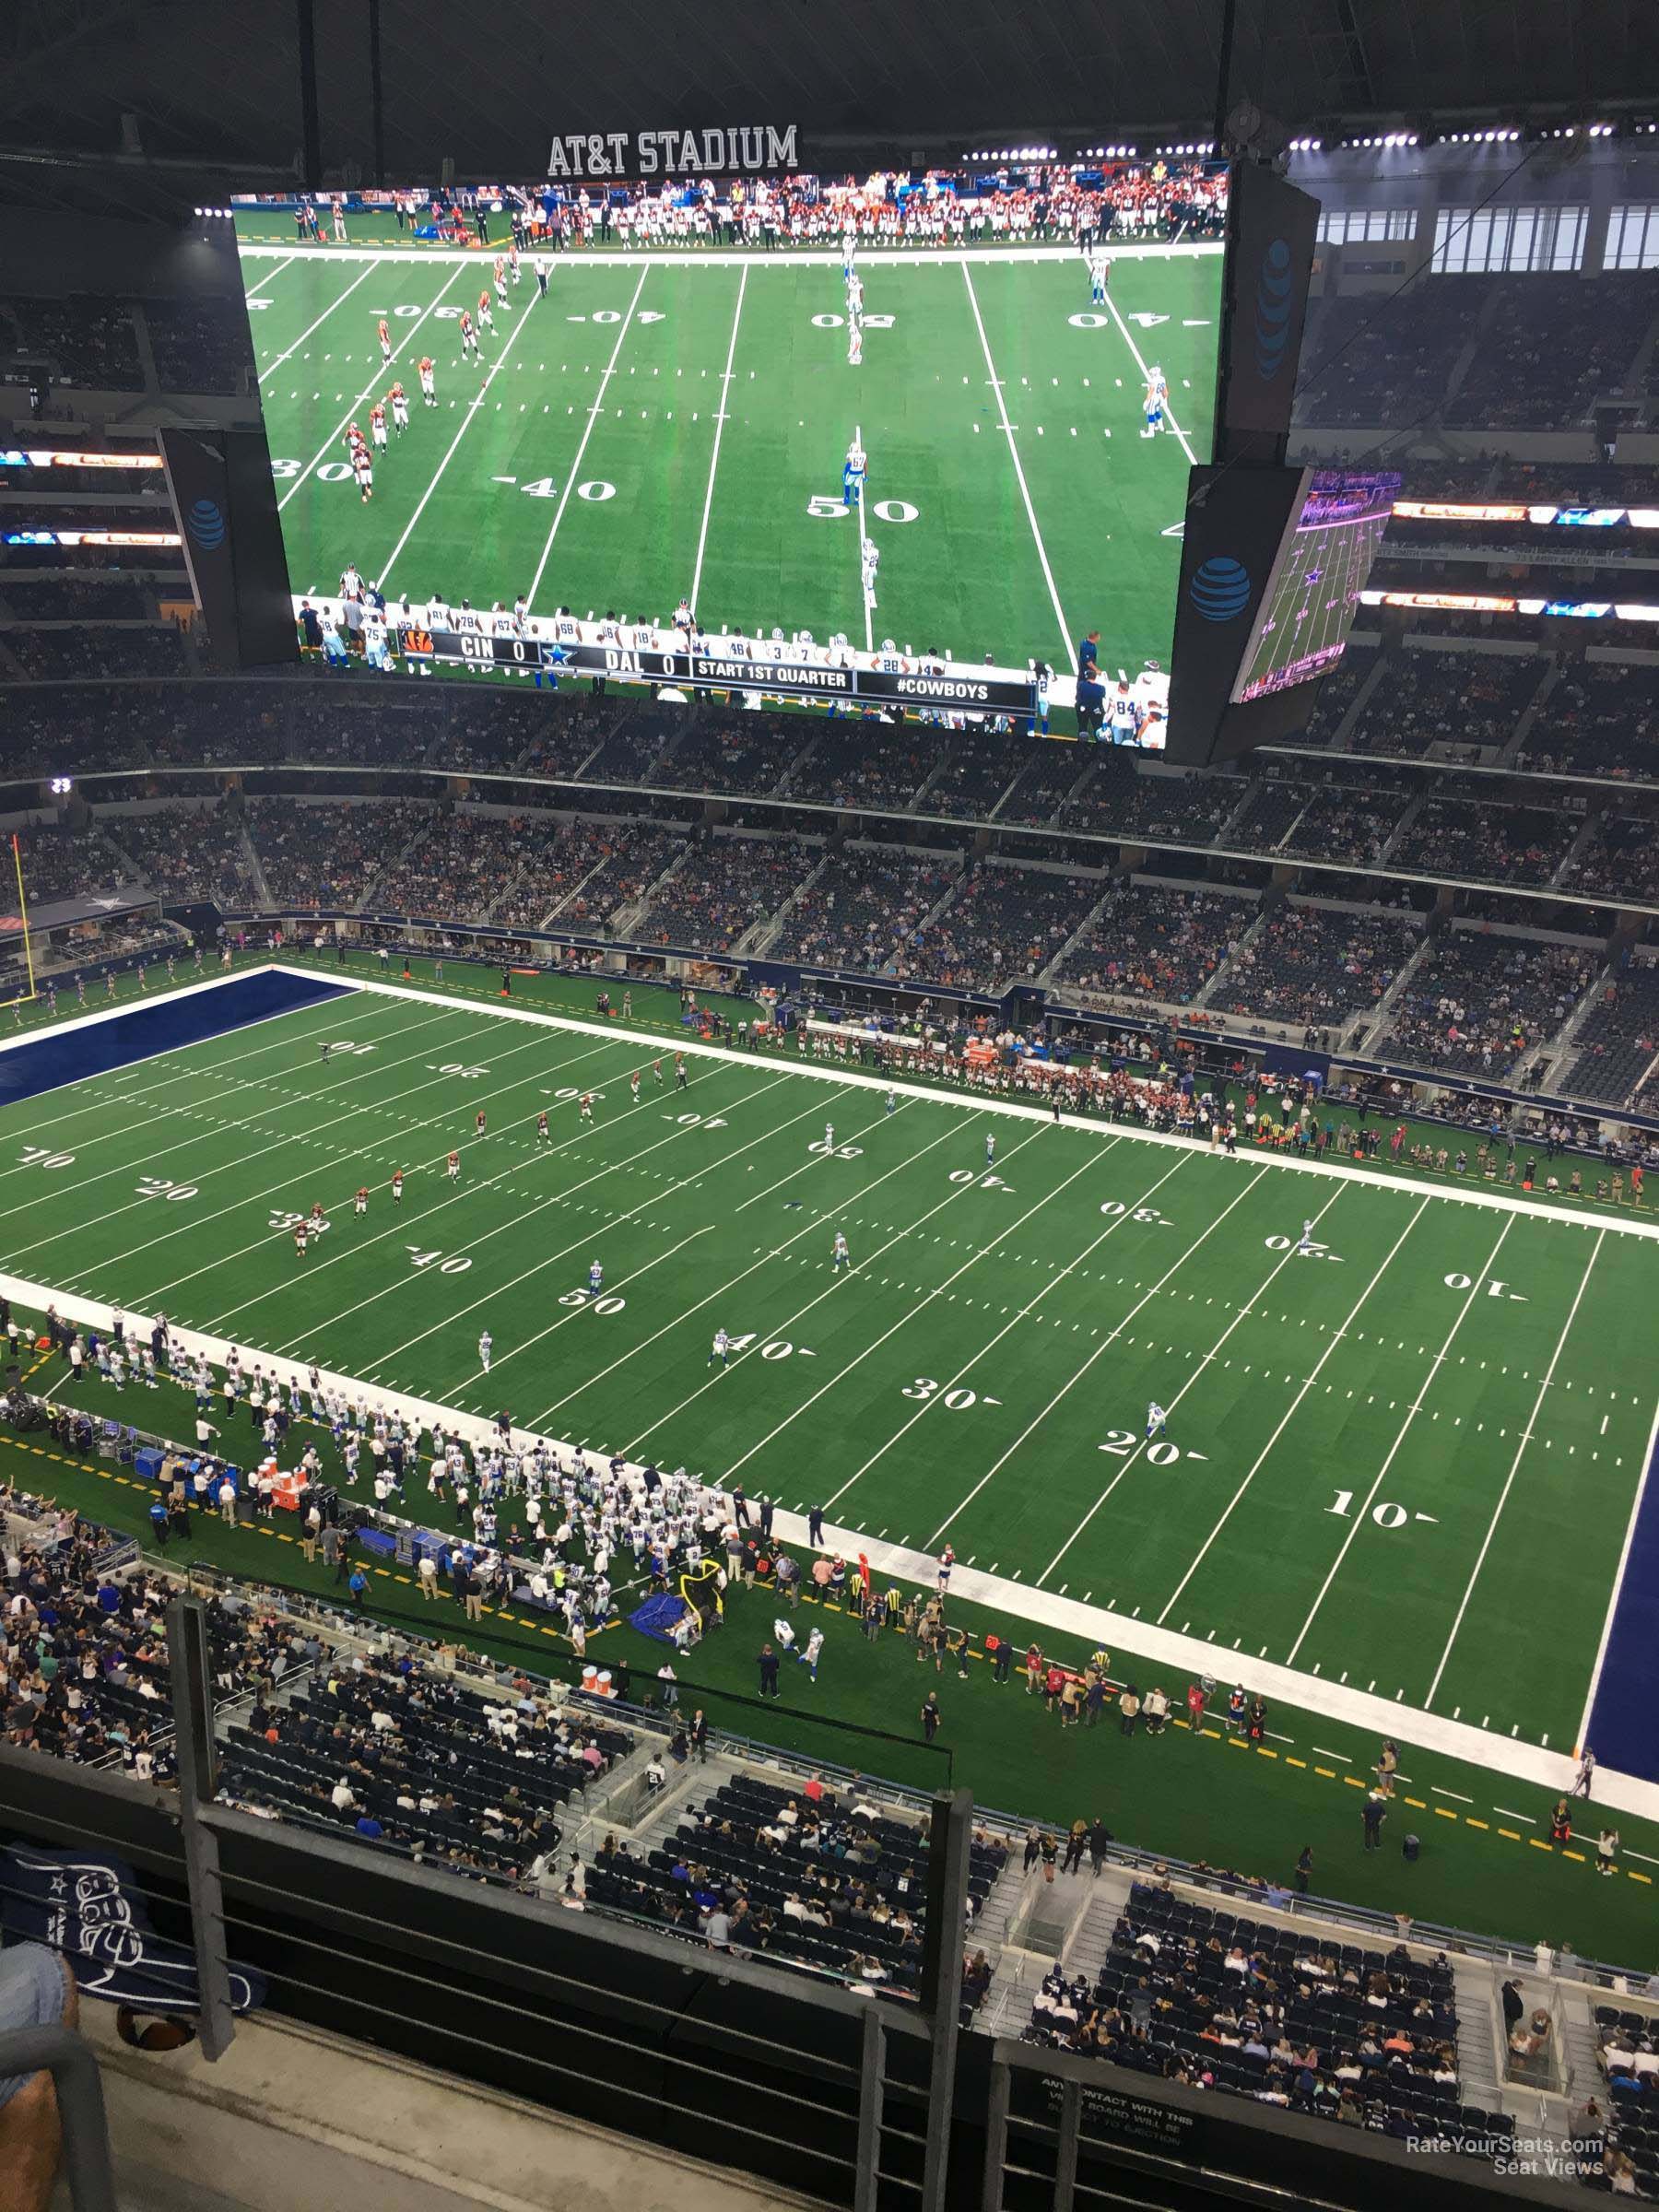 section 407, row 4 seat view  for football - at&t stadium (cowboys stadium)